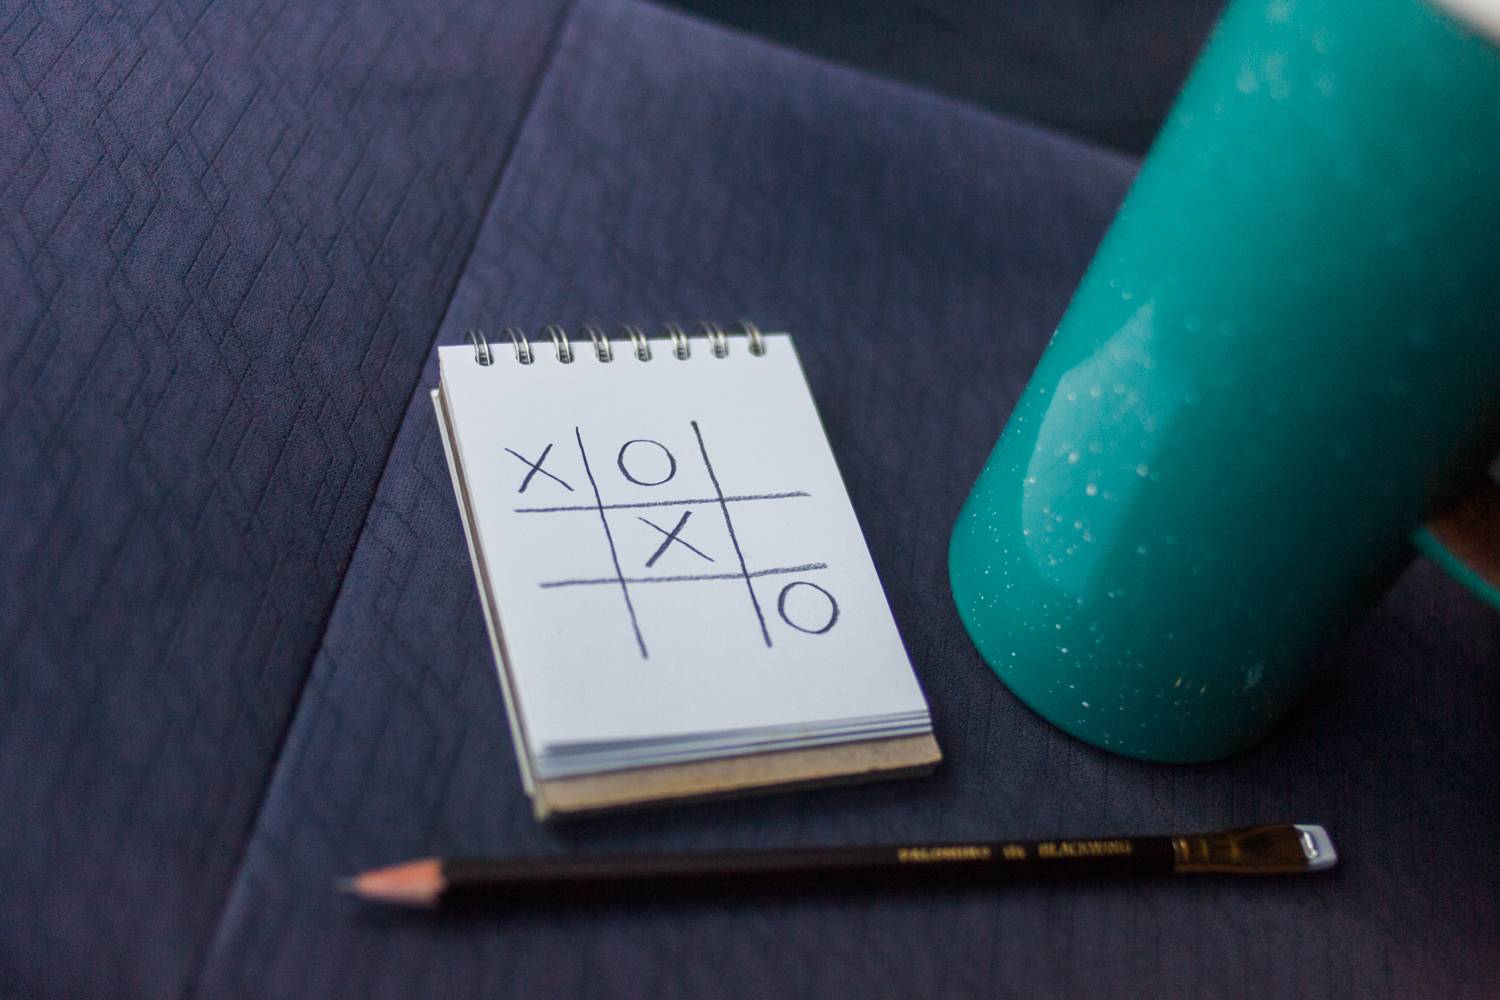 Road trip games: tic-tac-toe in the car with a travel mug